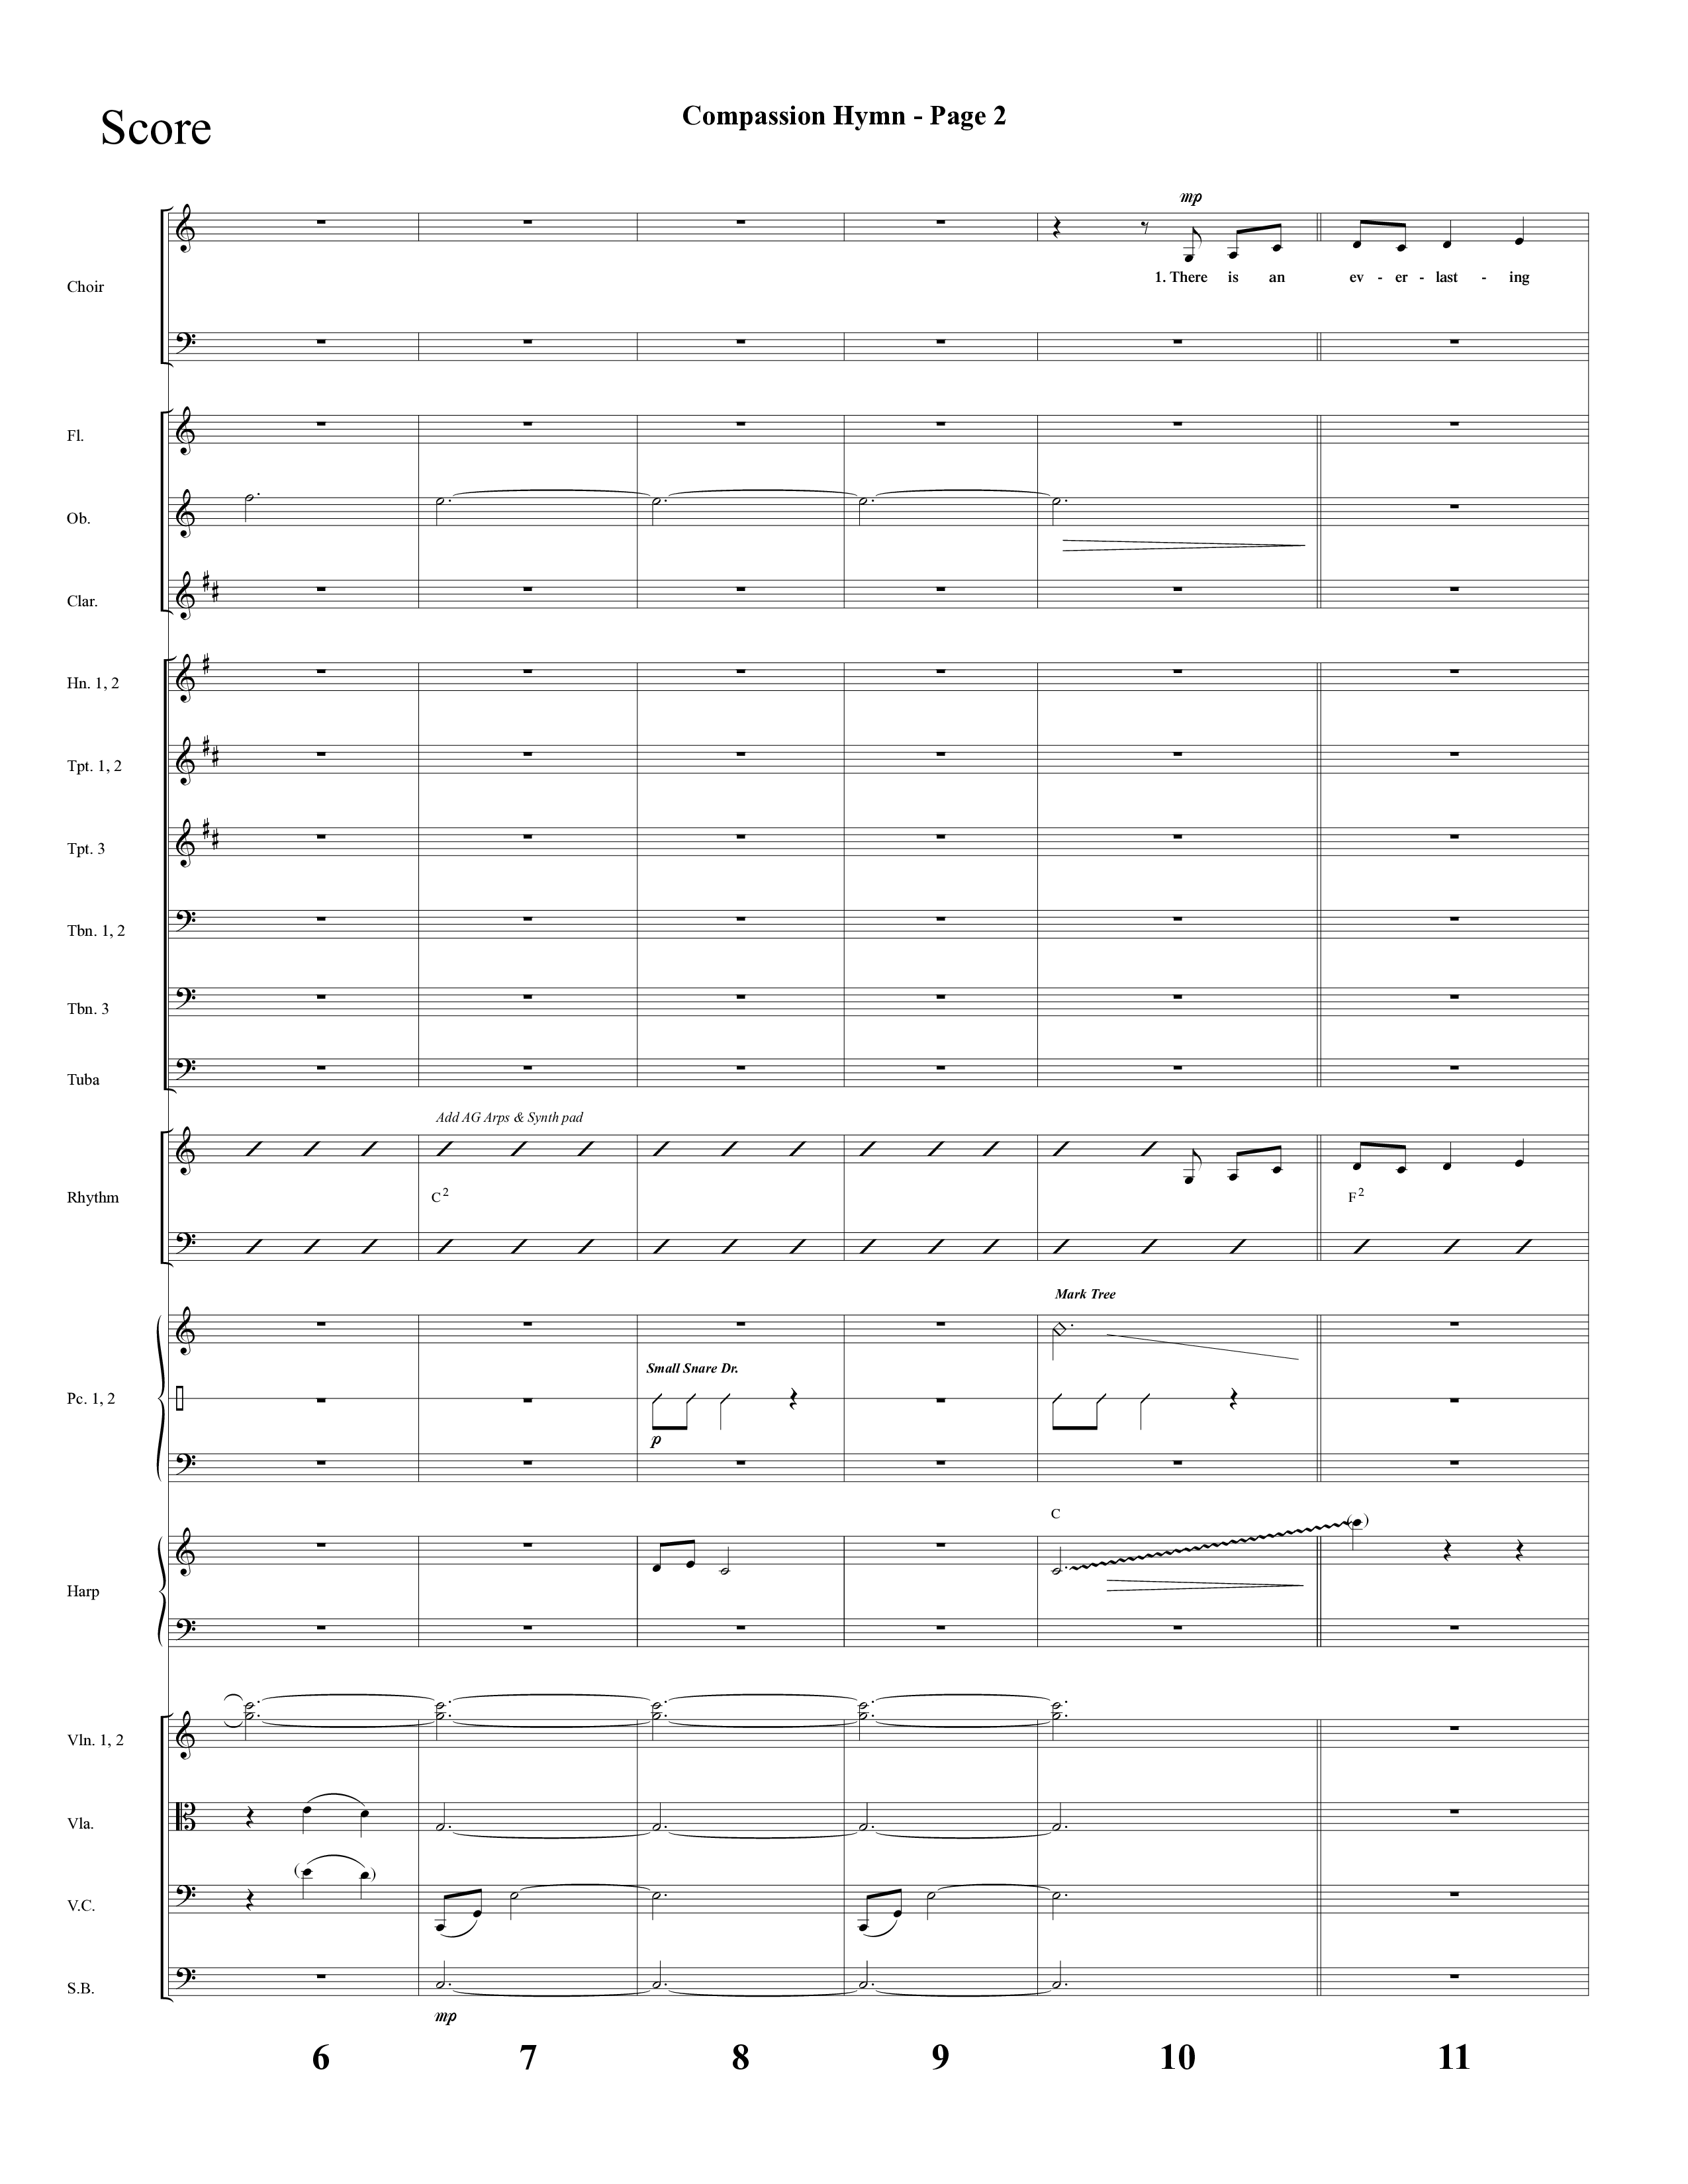 Compassion Hymn (with And Can It Be) (Choral Anthem SATB) Conductor's Score (Lifeway Choral / Arr. Dave Williamson)